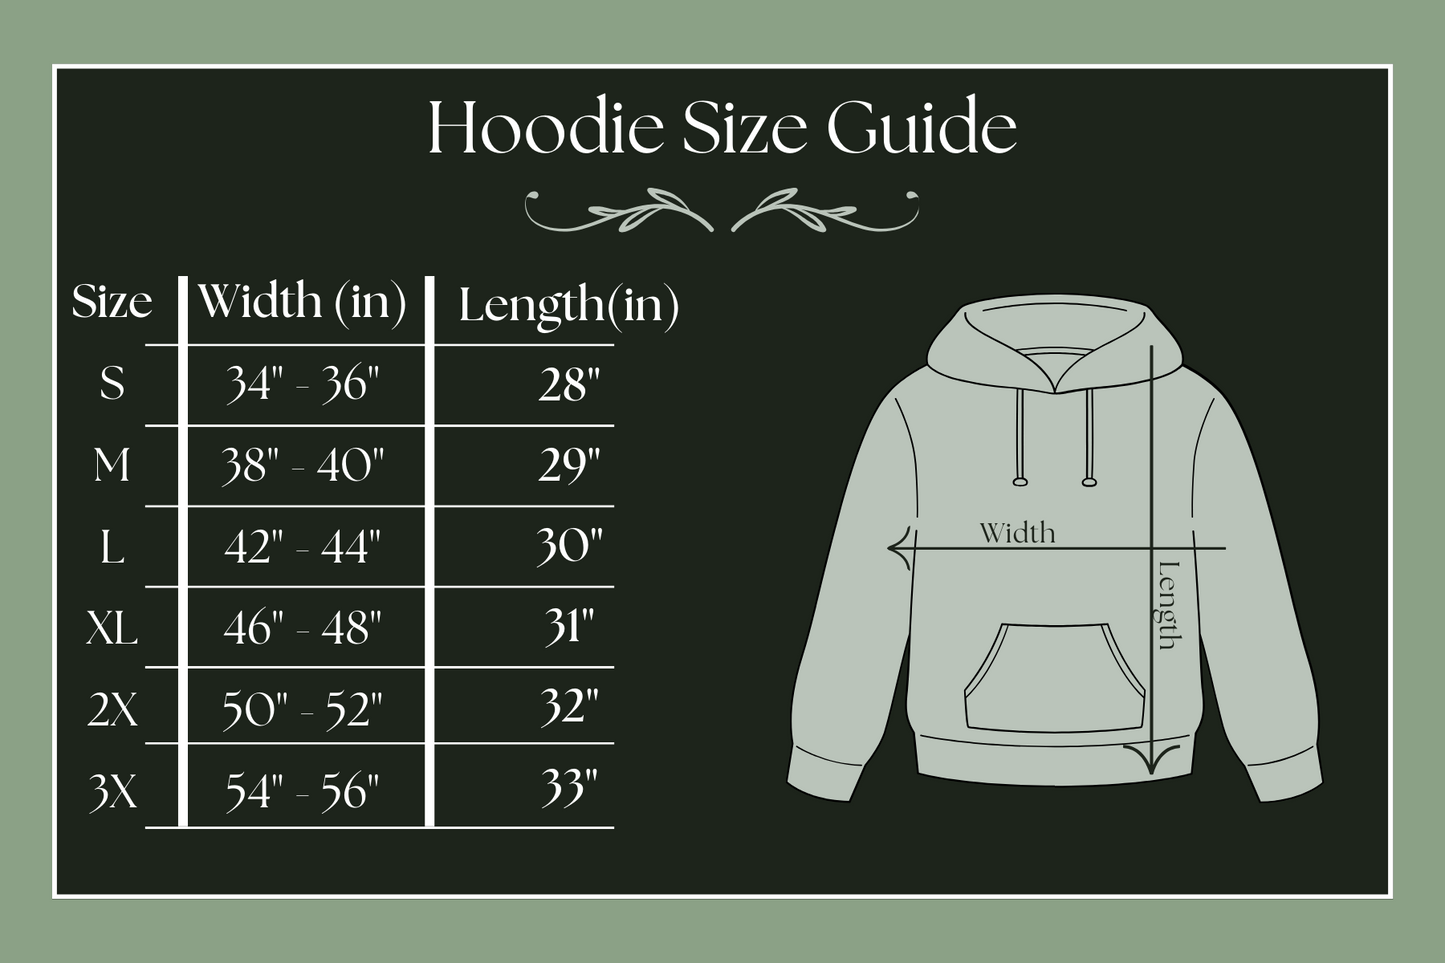 The Top-Tier Hooded Sweater